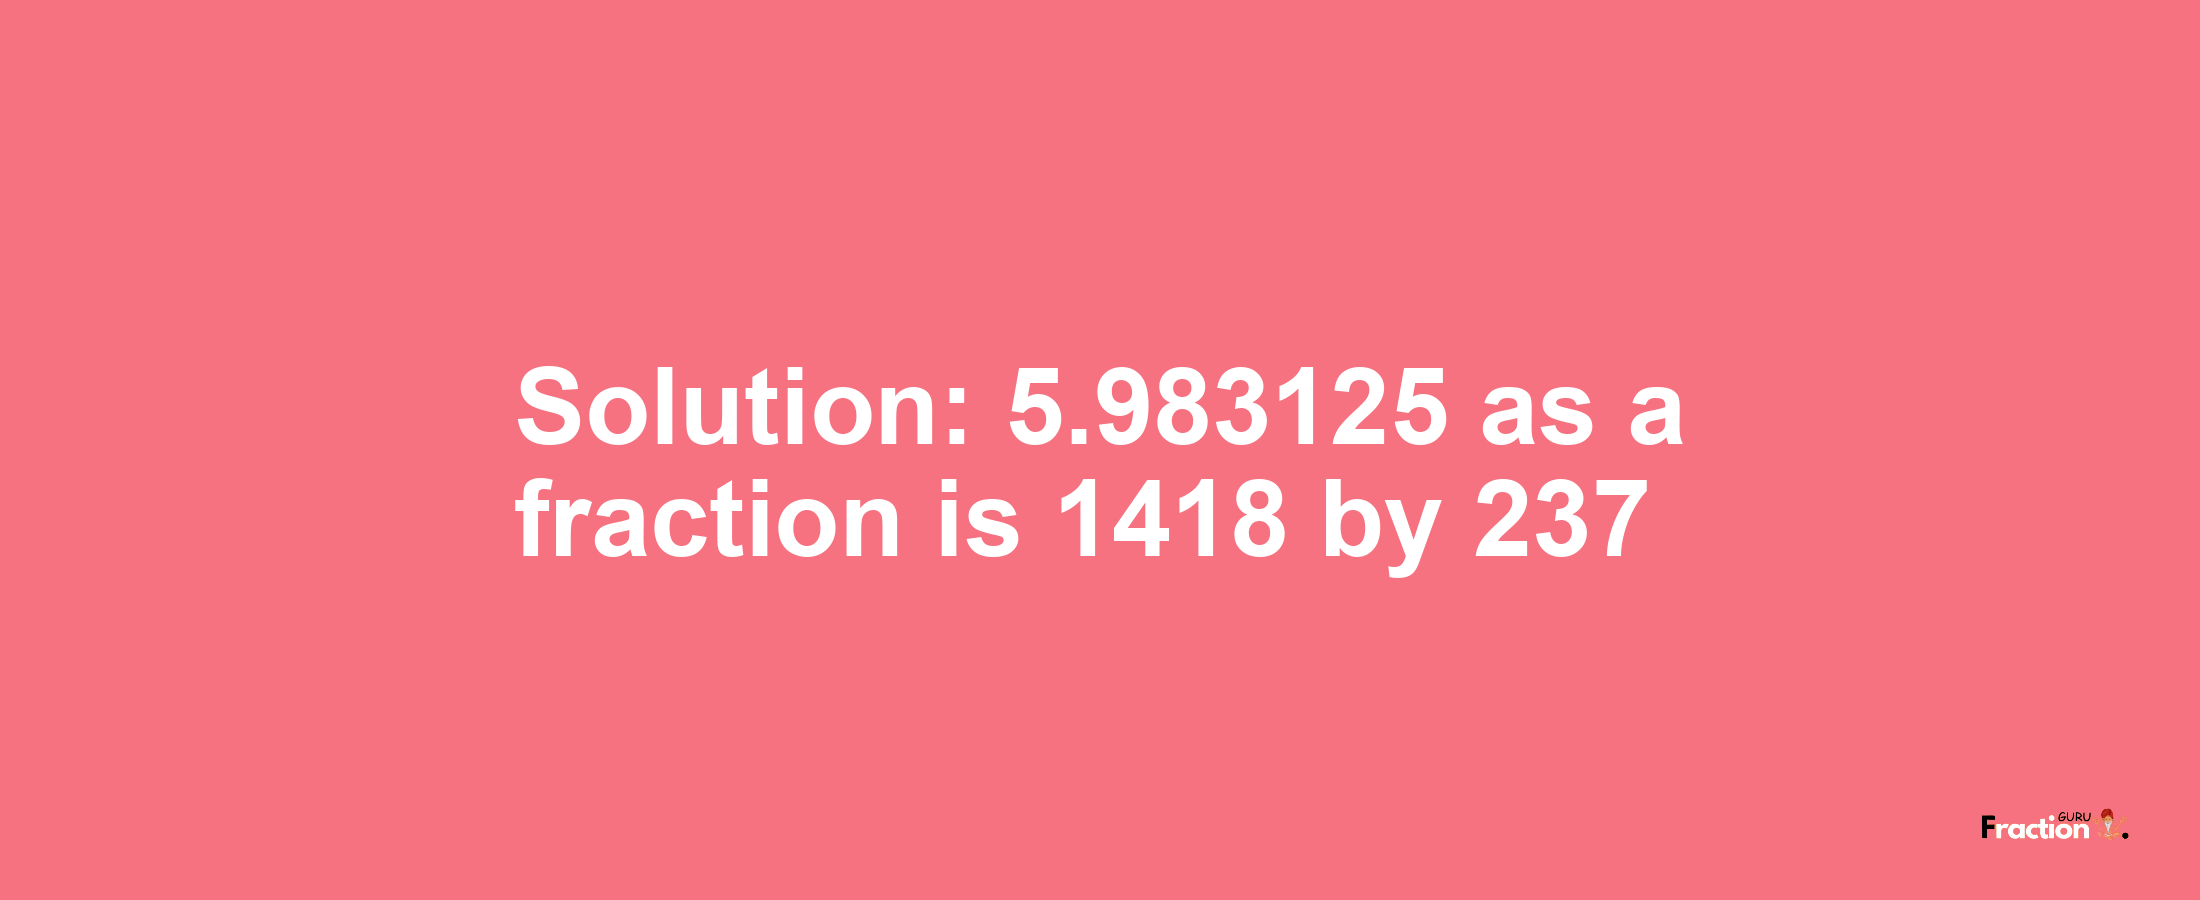 Solution:5.983125 as a fraction is 1418/237